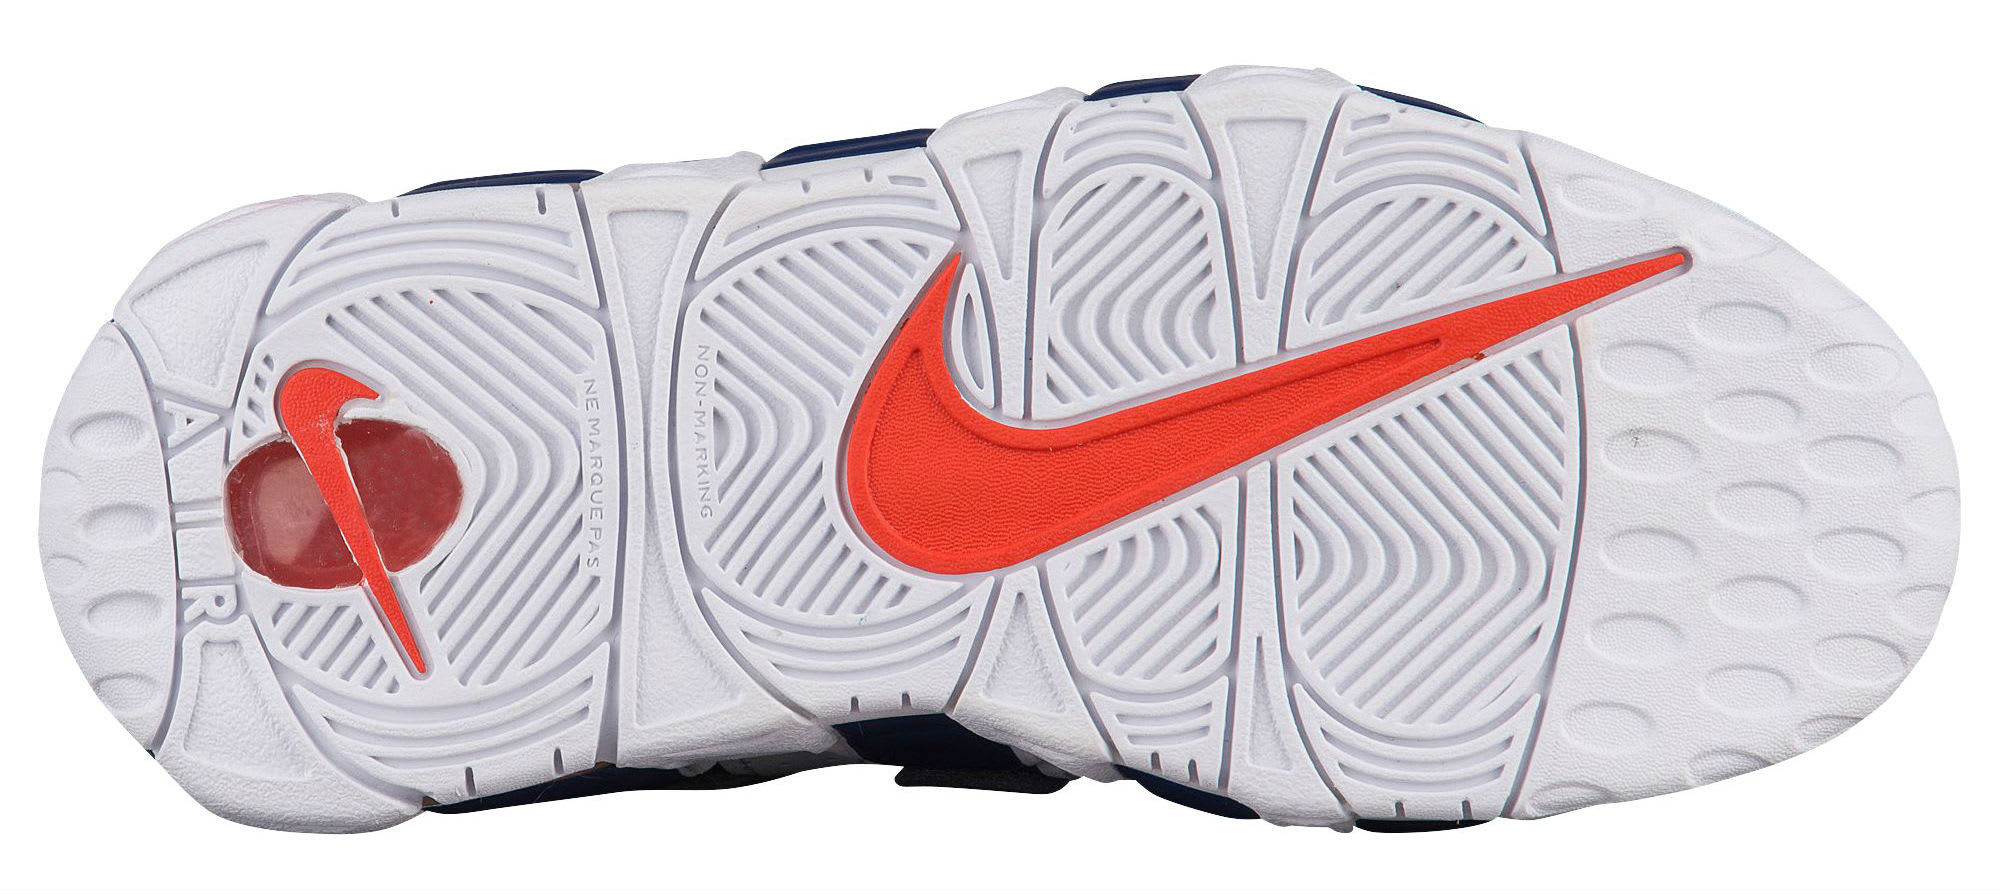 Nike Air More Uptempo Knicks Release Date Sole